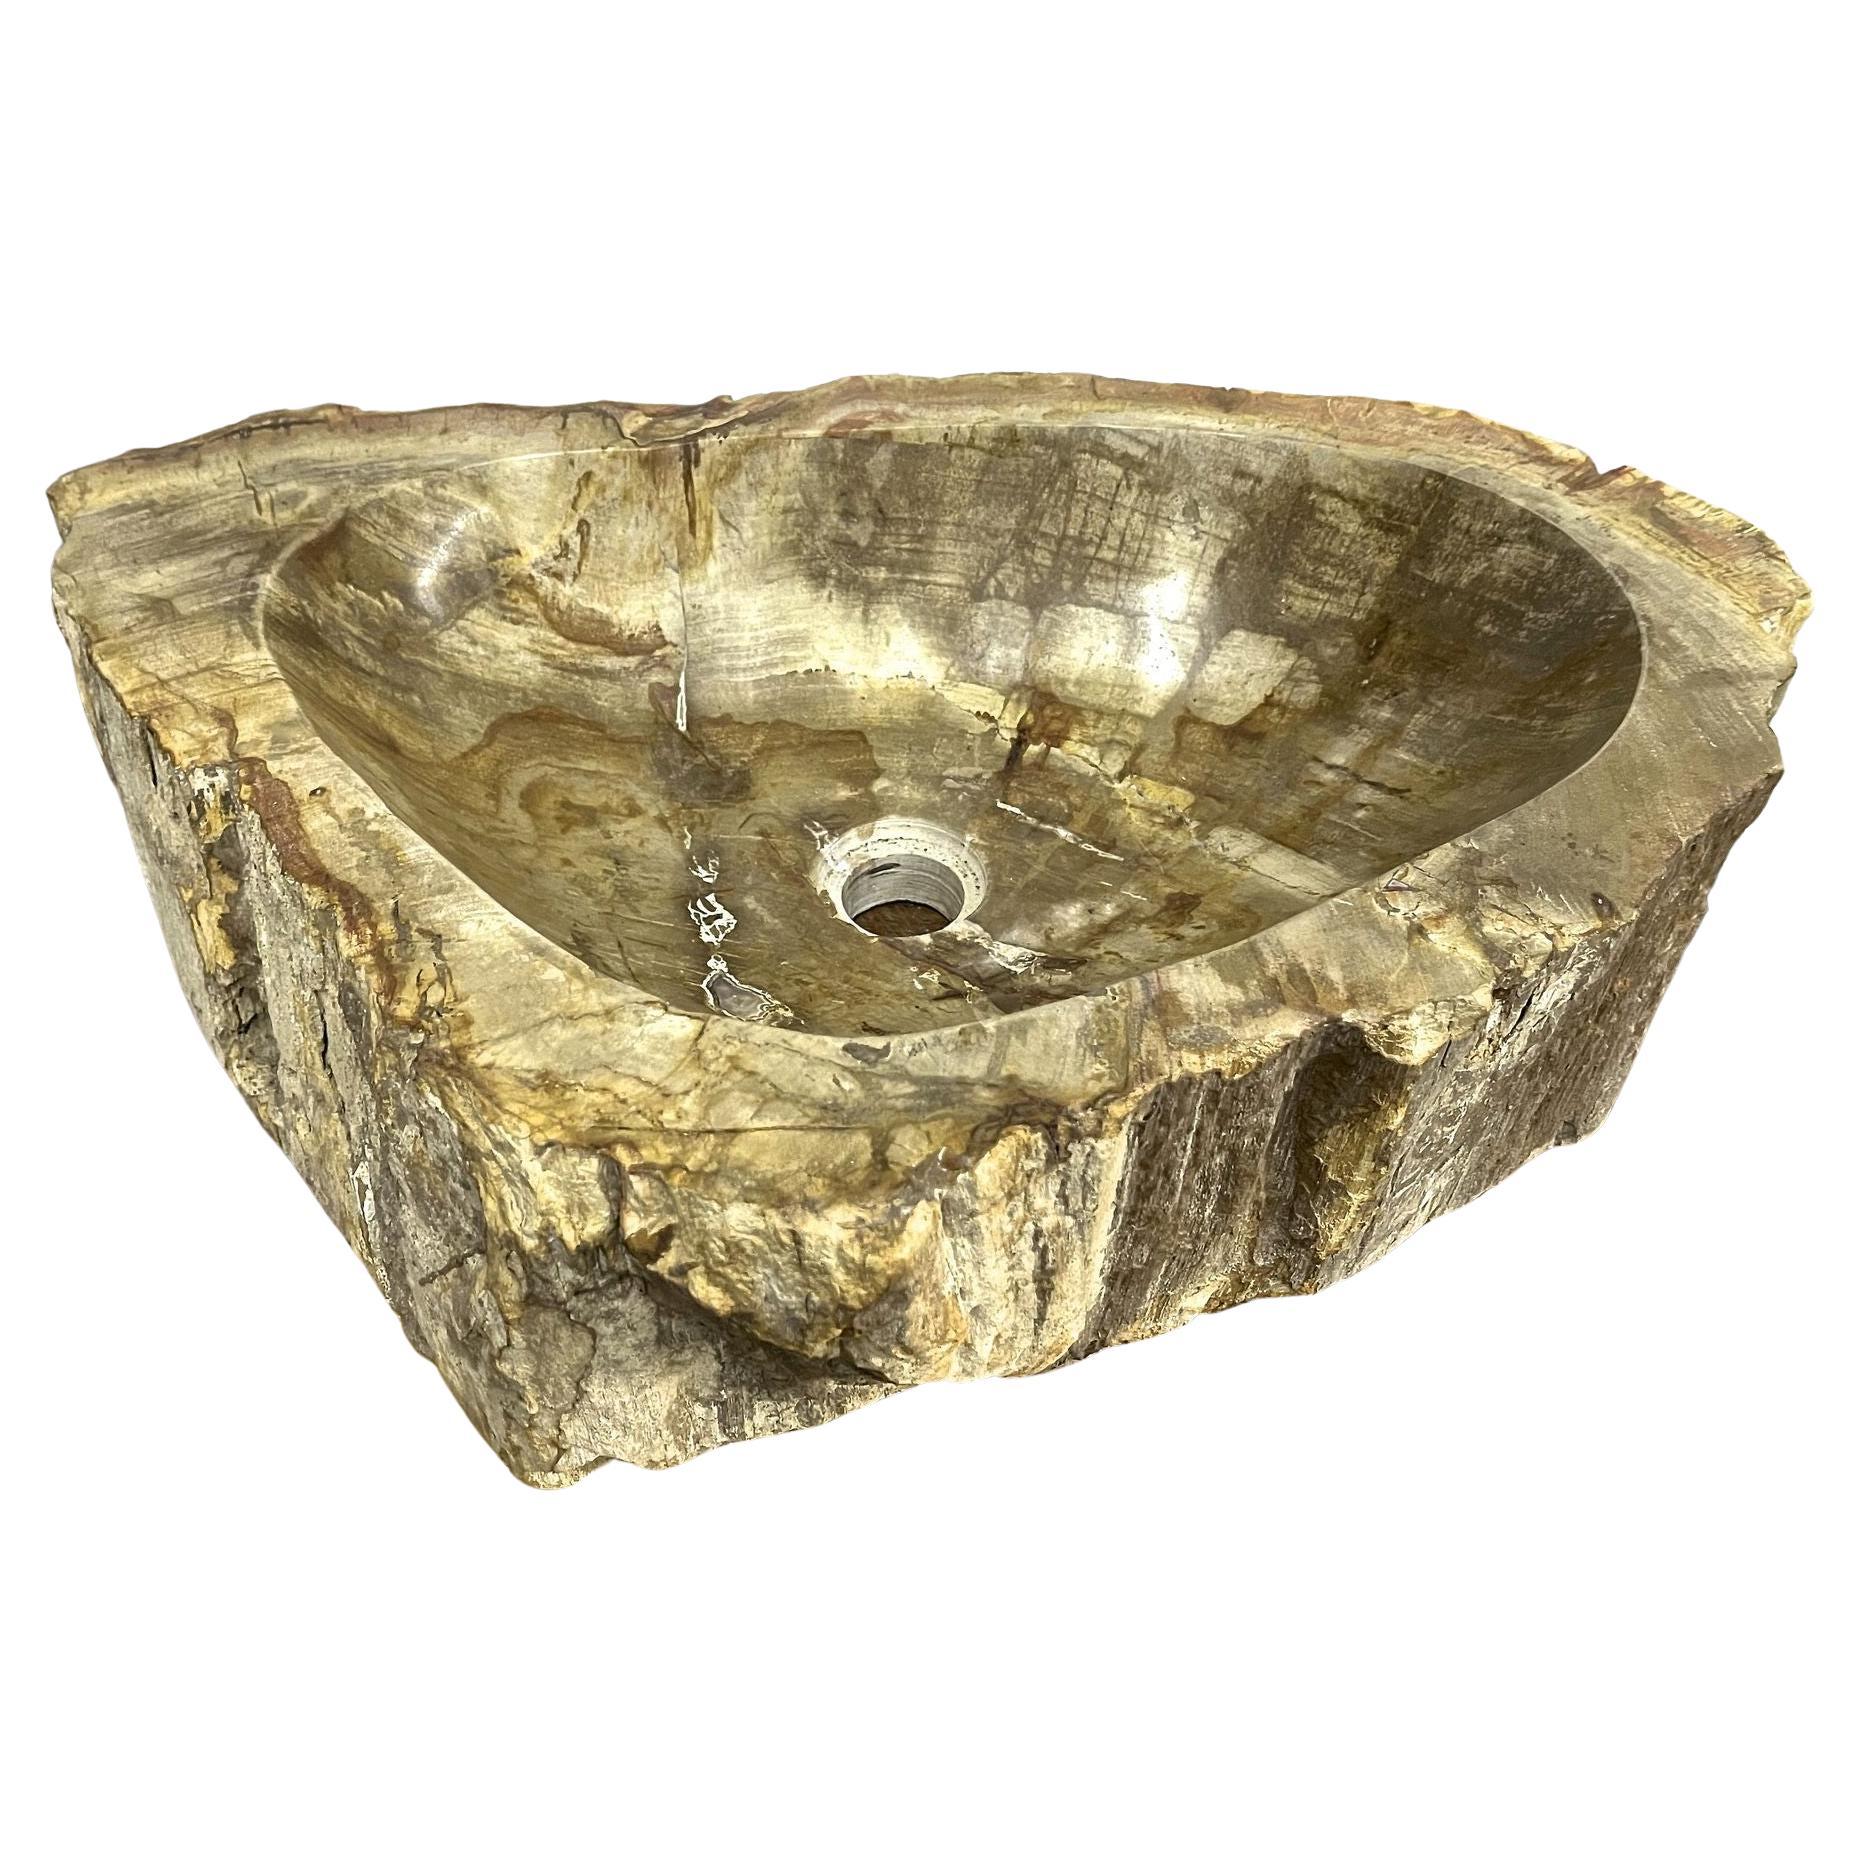 Petrified Wood Sink in Beige/ Yellow/ Brown Tones Polished, Top Quality